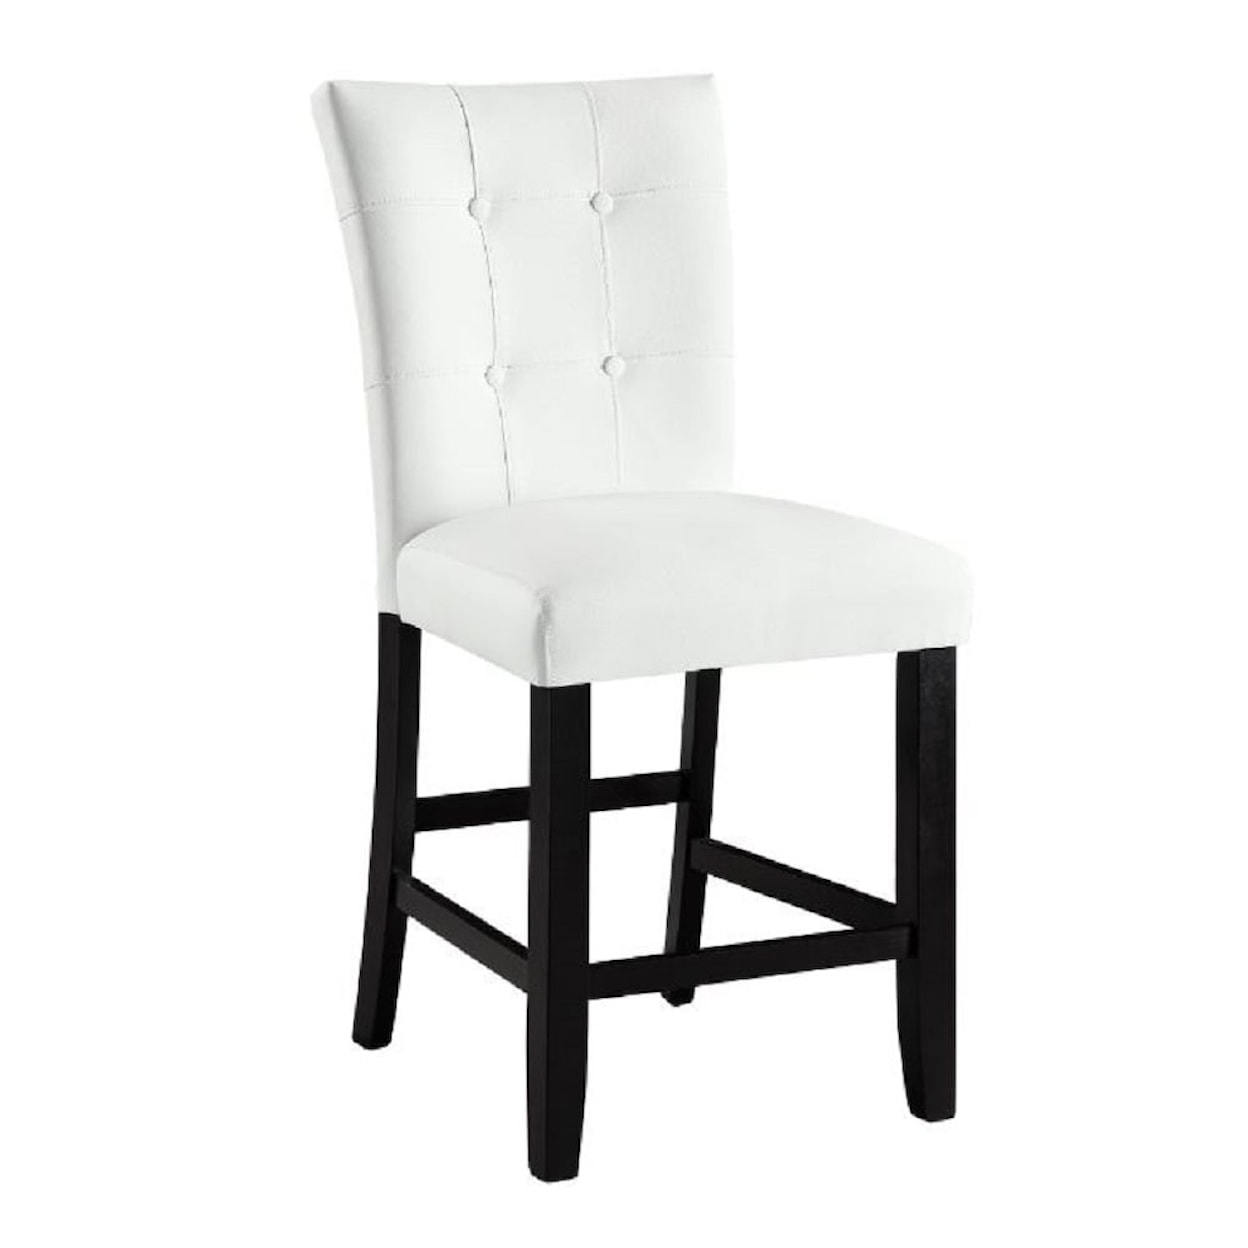 Acme Furniture Hussein Counter Height Chair